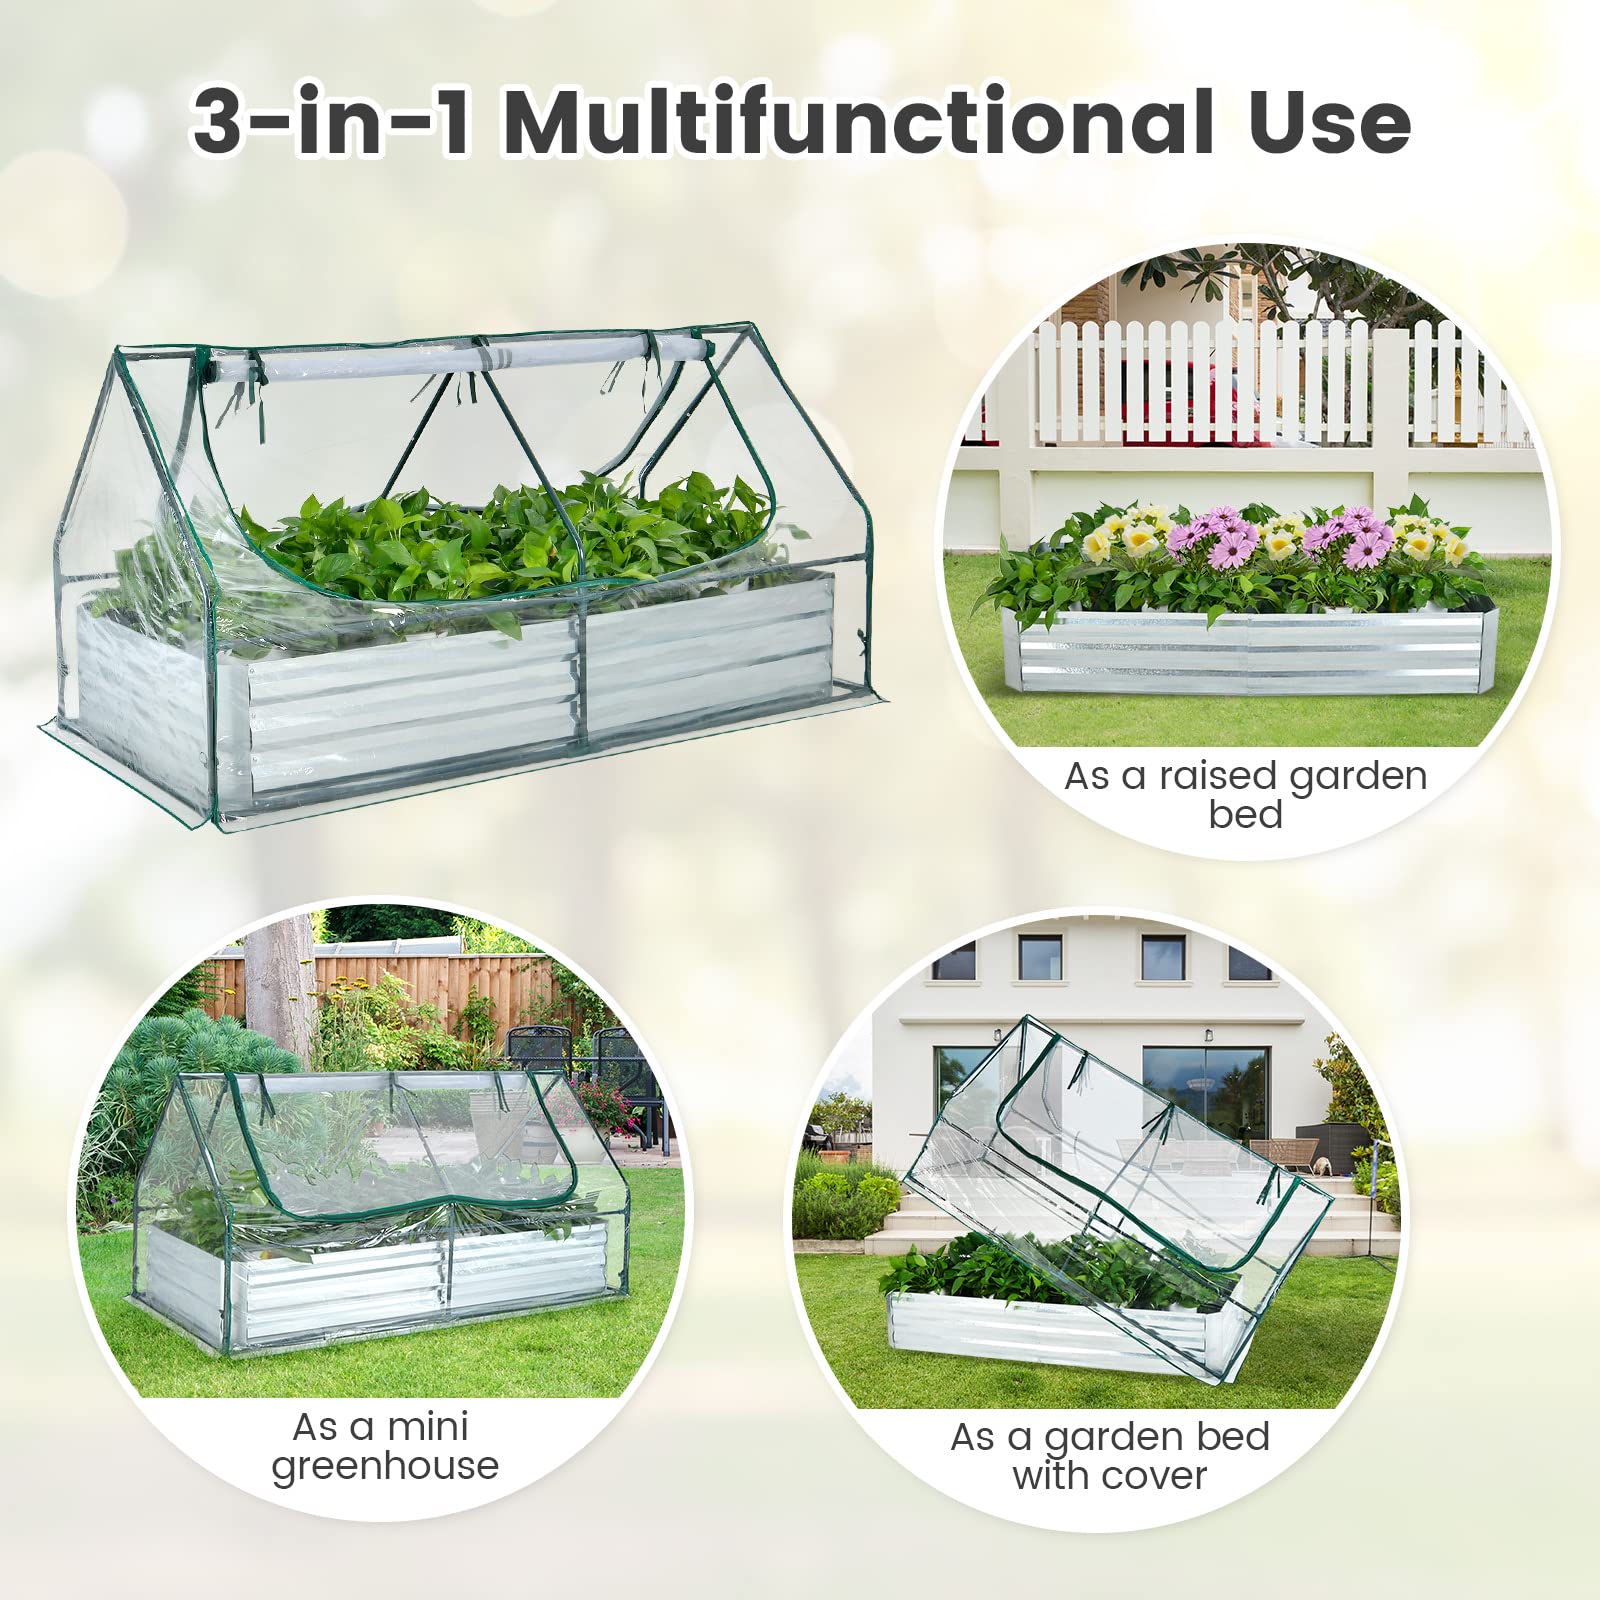 Giantex Galvanized Steel Raised Garden Bed with Mini Greenhouse, Outdoor Metal Planter Box Kit with Large Roll-up PVC Cover